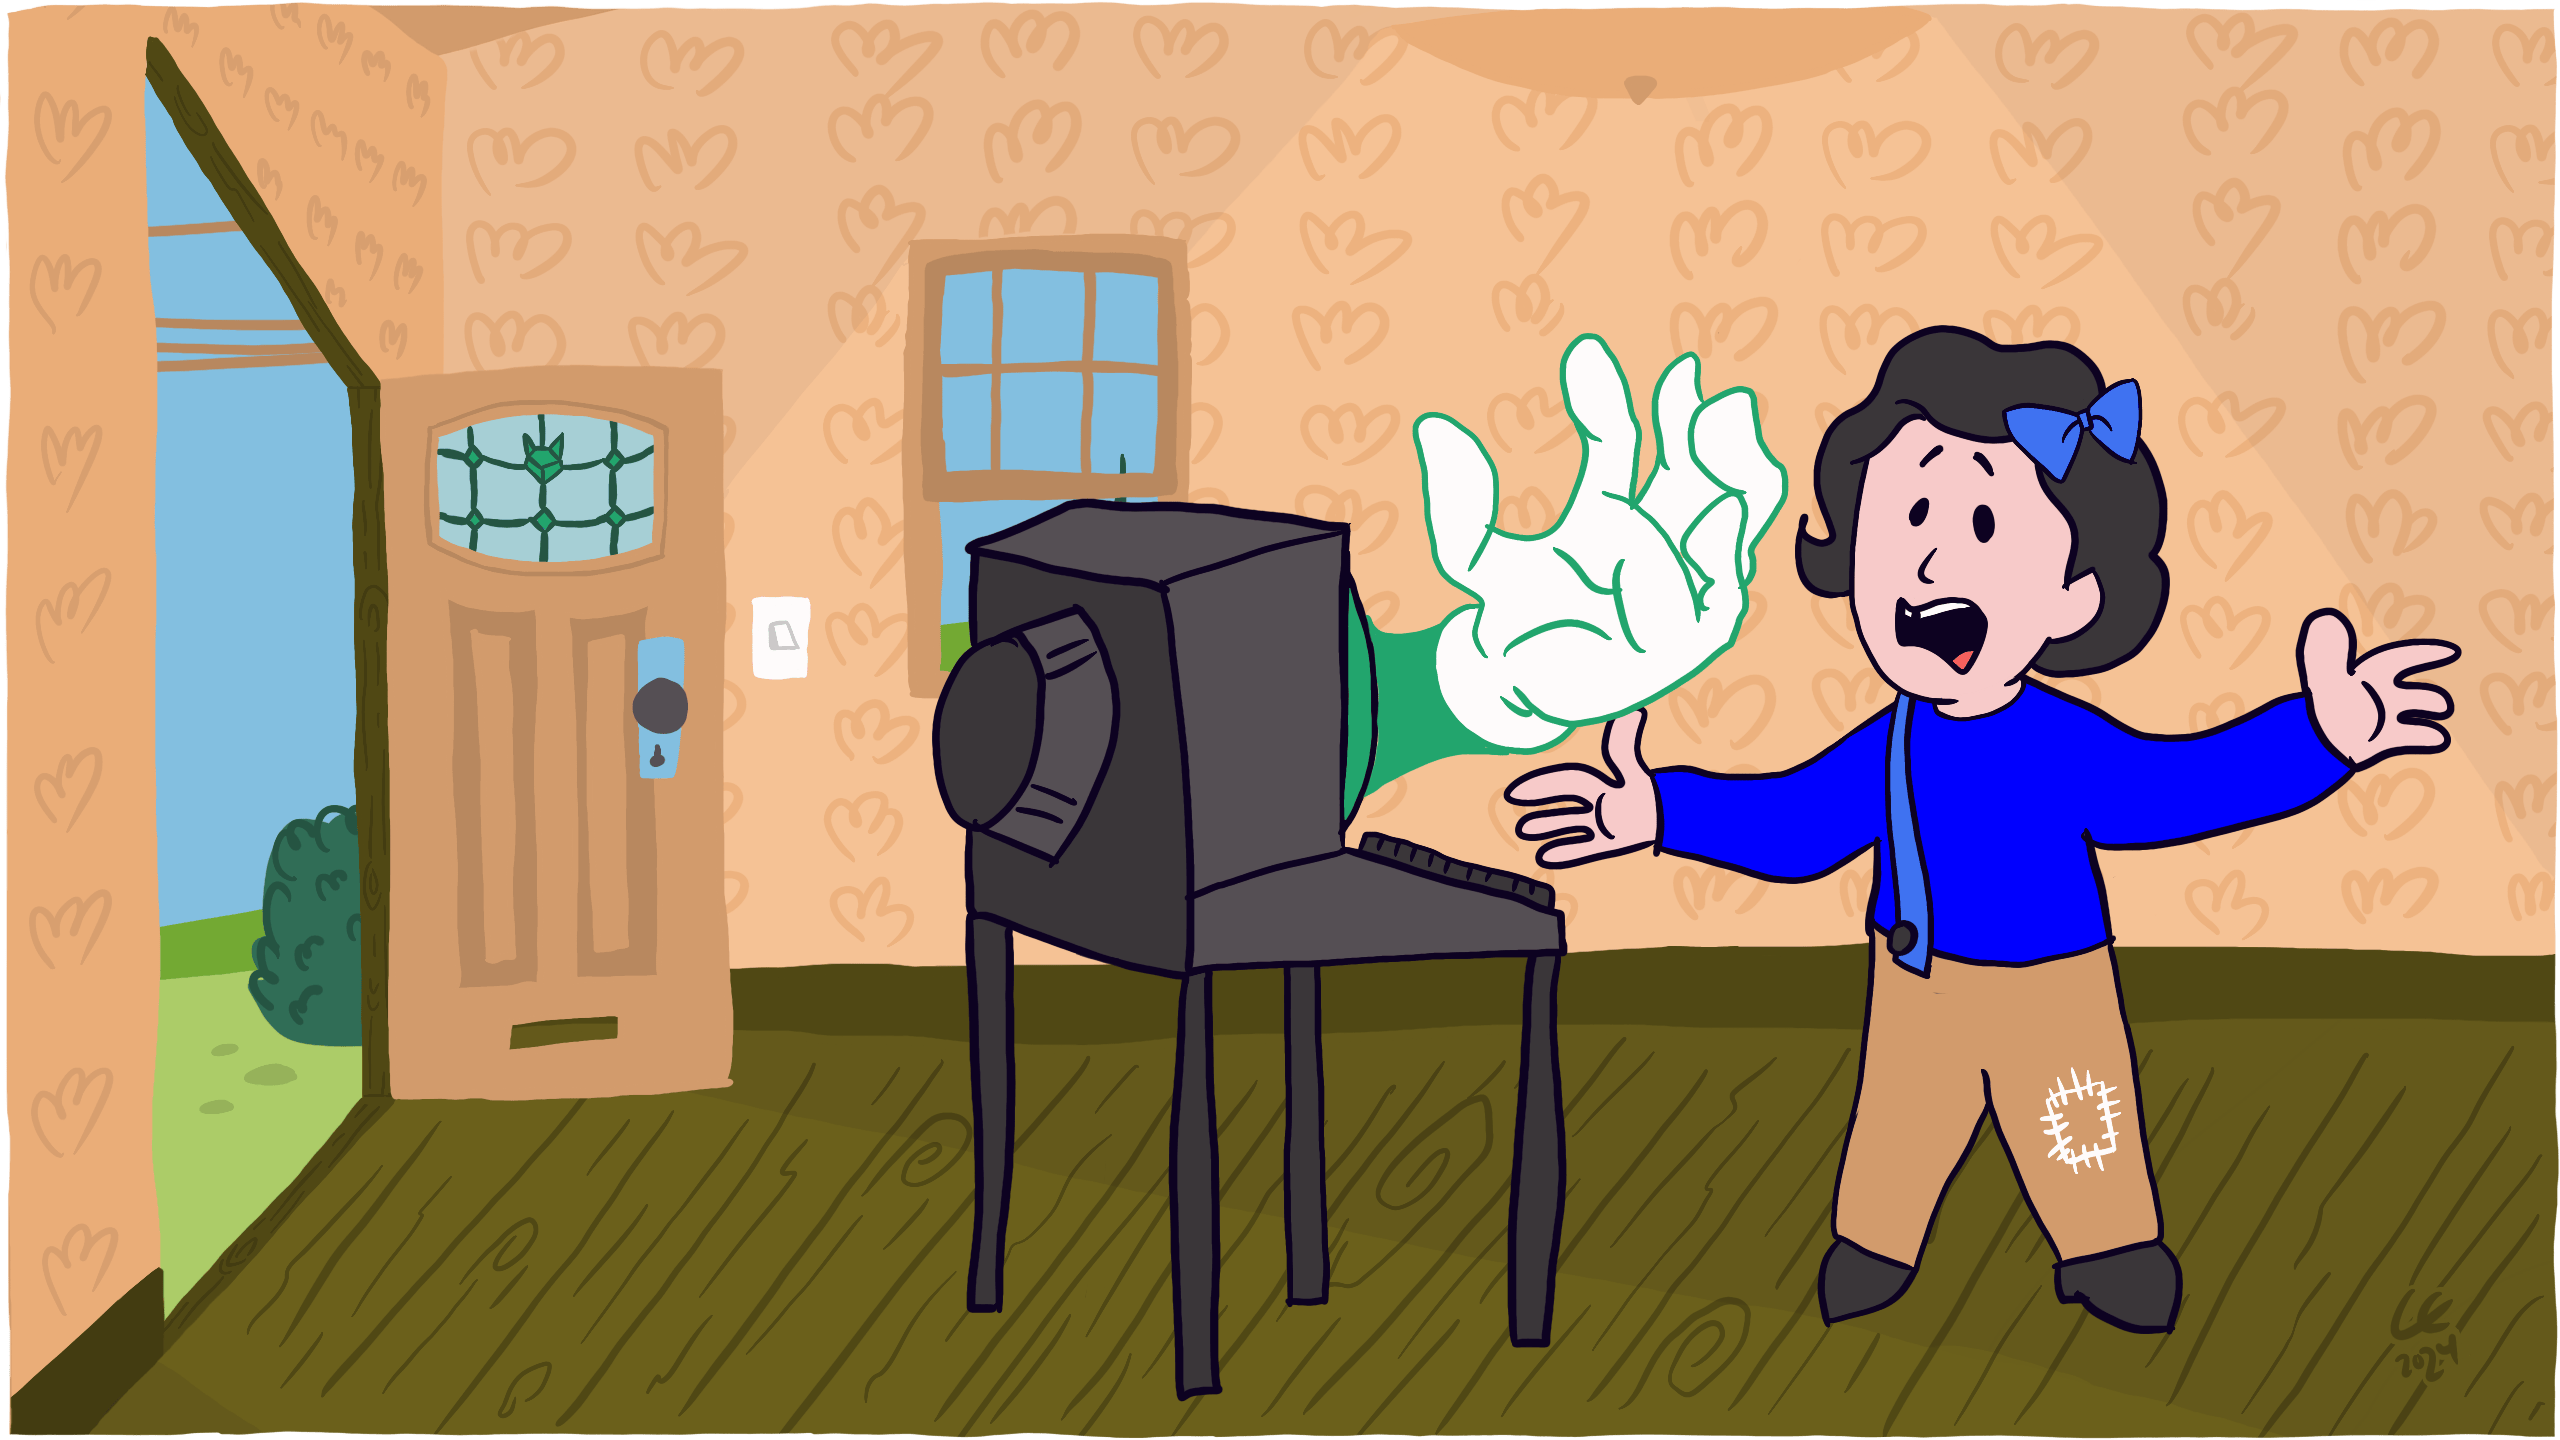 Frankie is horrified by a giant hand reaching out from their computer trying to grab them. Illustration by Carlos Eriksson.